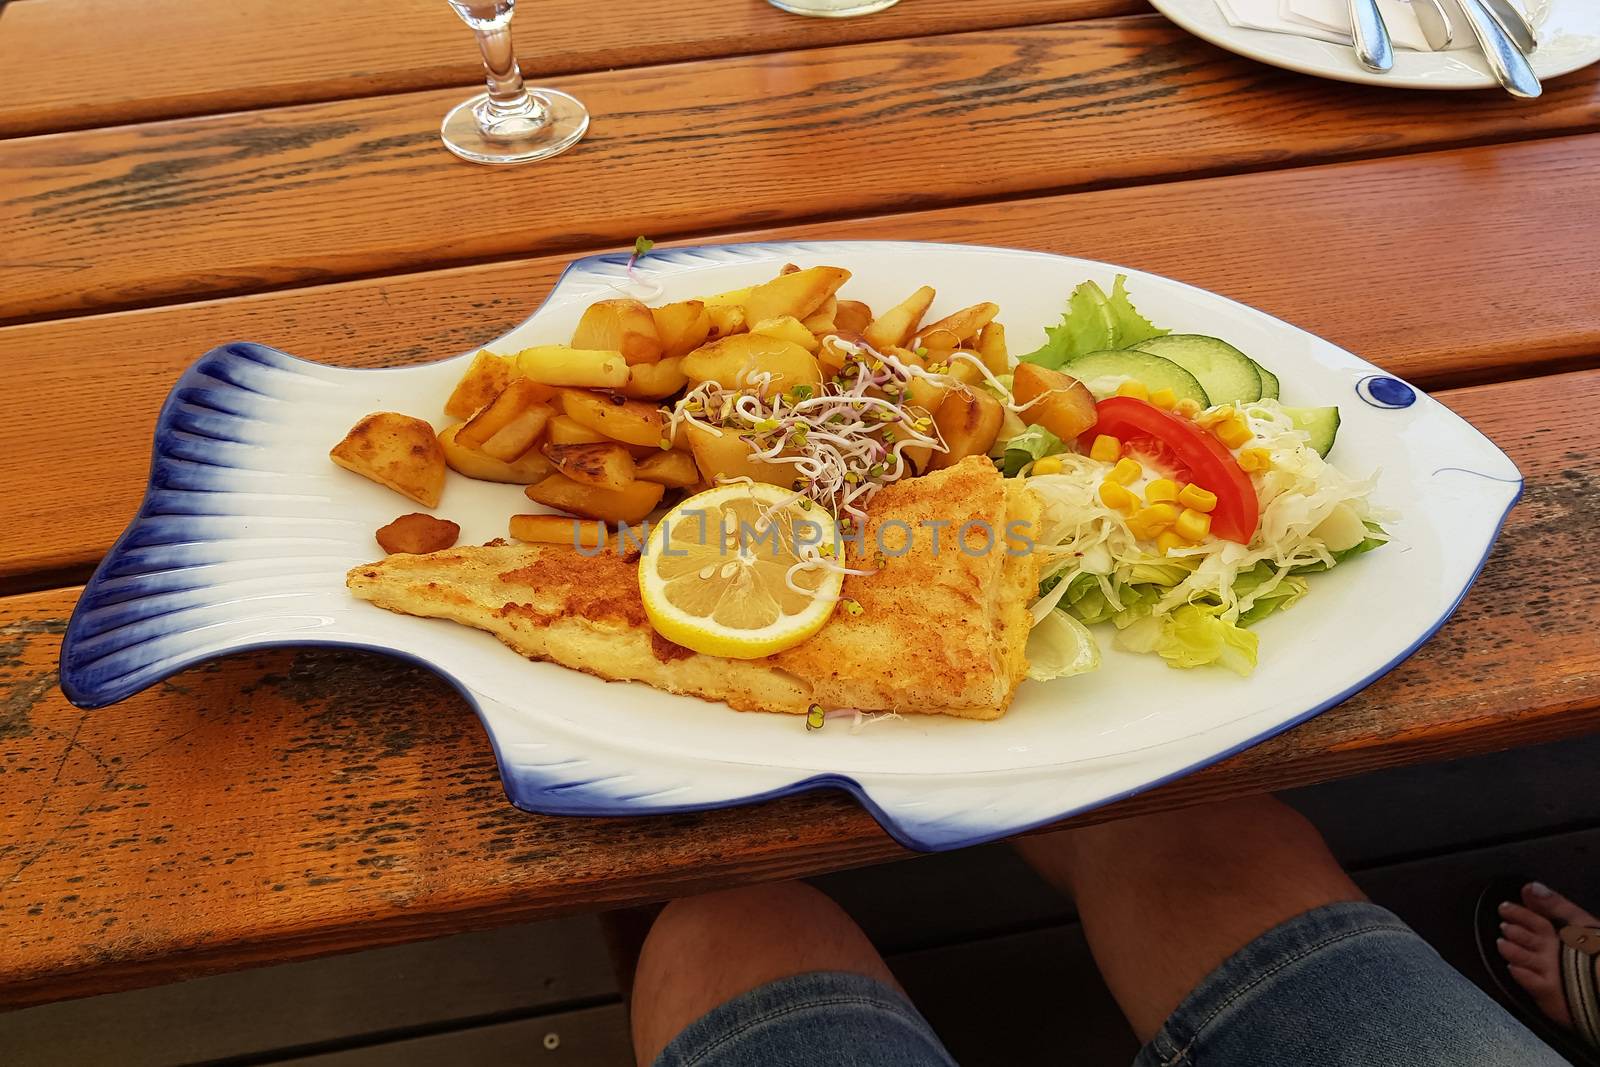 Fried fish on fish-shaped plate  by JFsPic